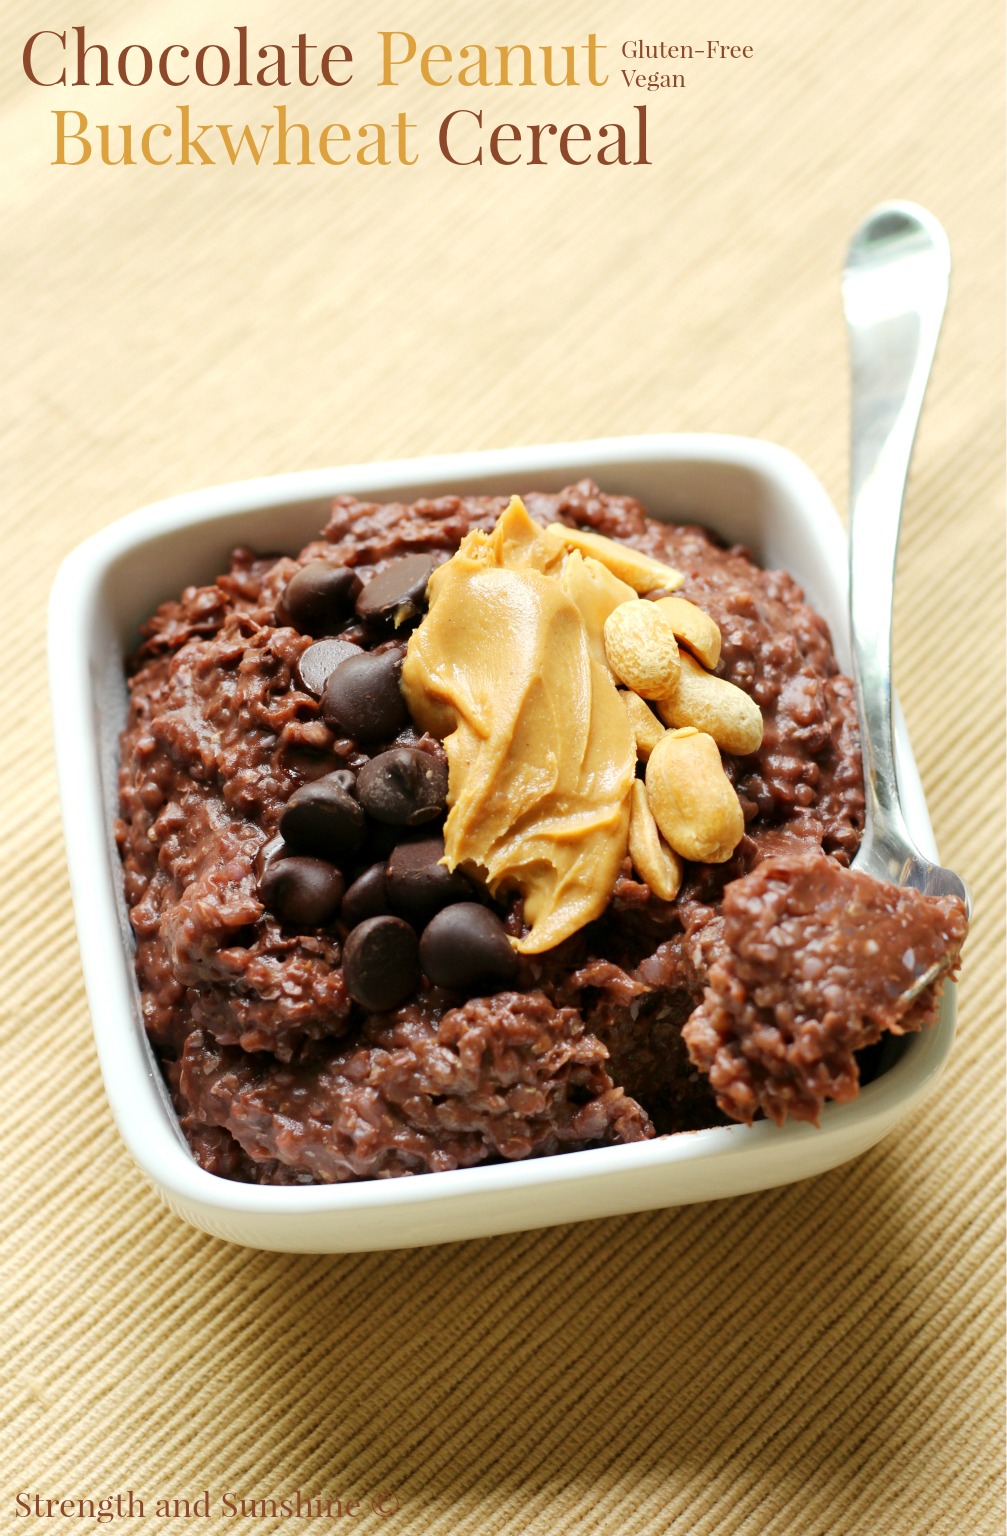 Chocolate Peanut Buckwheat Cereal | Strength and Sunshine @RebeccaGF666 A healthy breakfast indulgence to power you up for the day! Chocolate peanut buckwheat cereal is a hot, creamy, protein-packed, decadent, gluten-free and vegan recipe you can whip up right in the microwave!